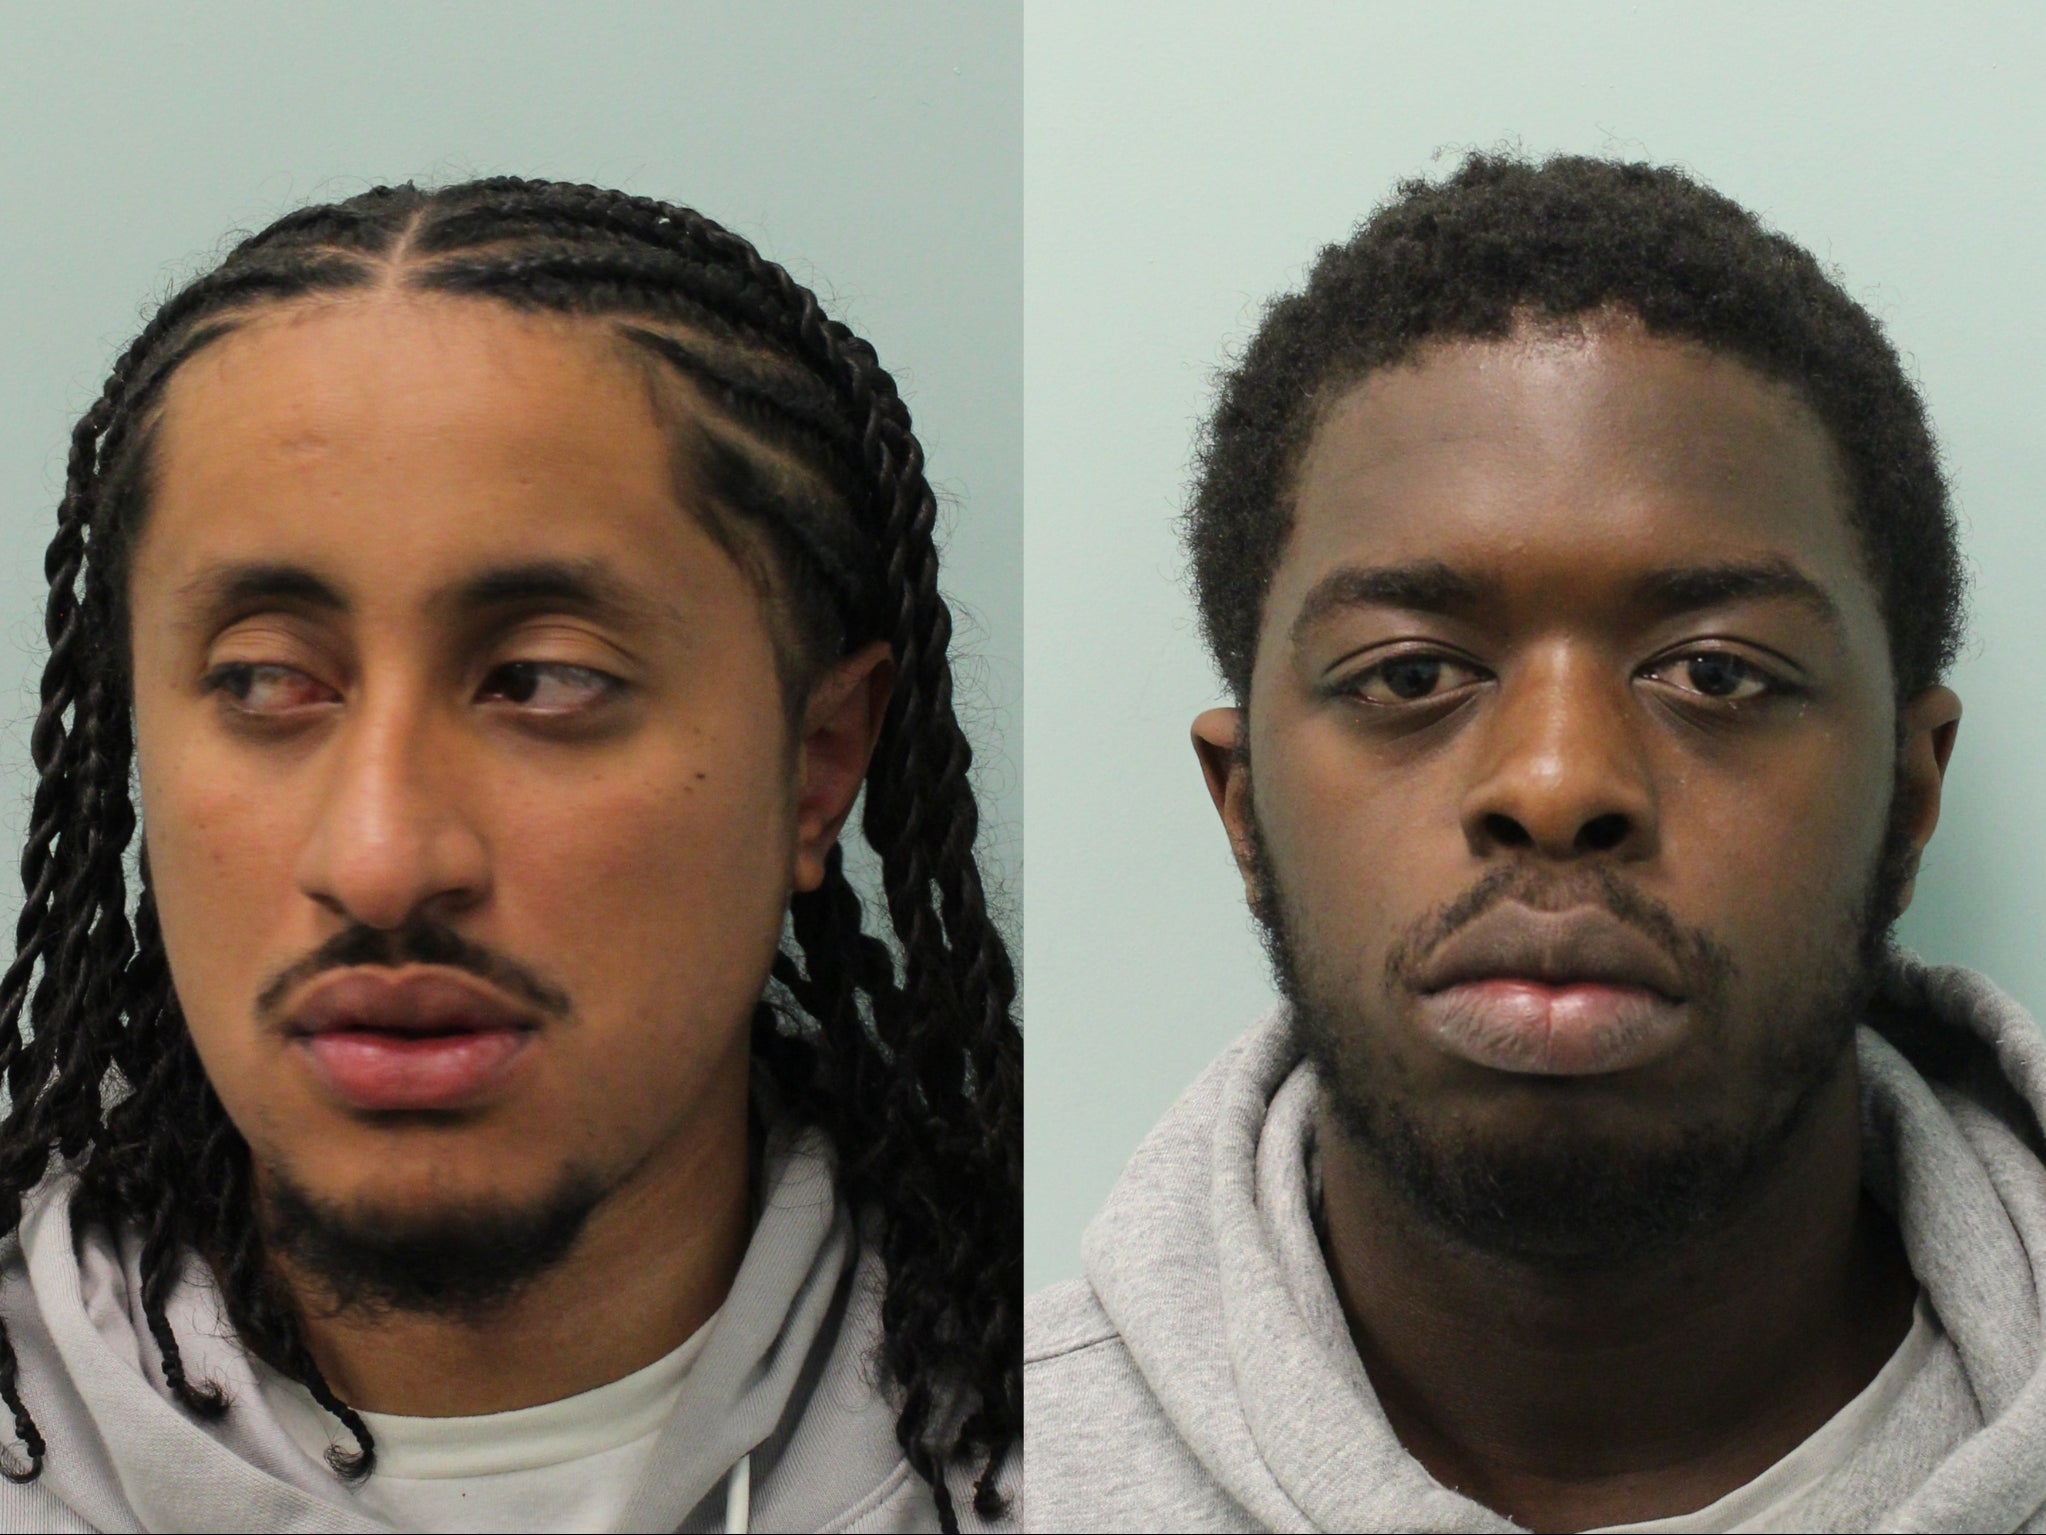 Ahmed Bana, 25, and Dante Campbell, 20, have both admitted to their roles in the robbery